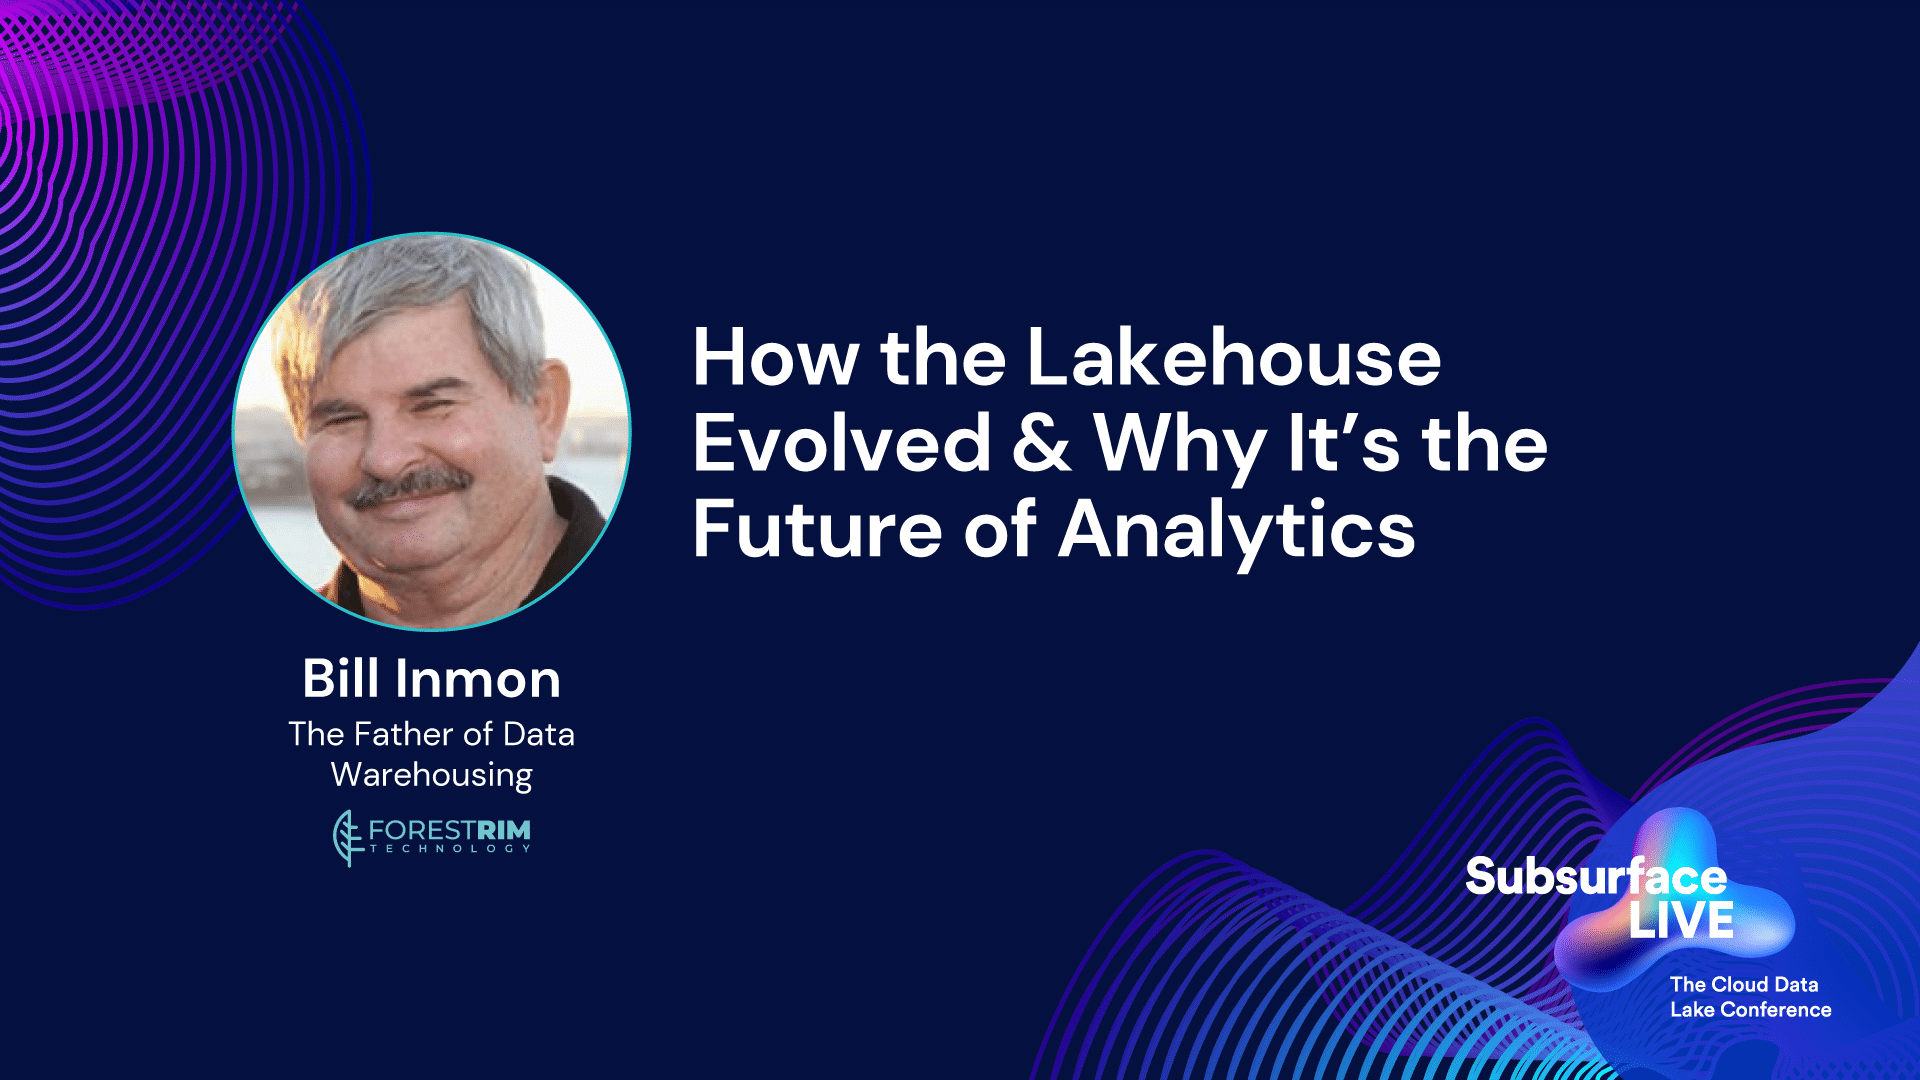 How the Lakehouse Evolved & Why It’s the Future of Analytics